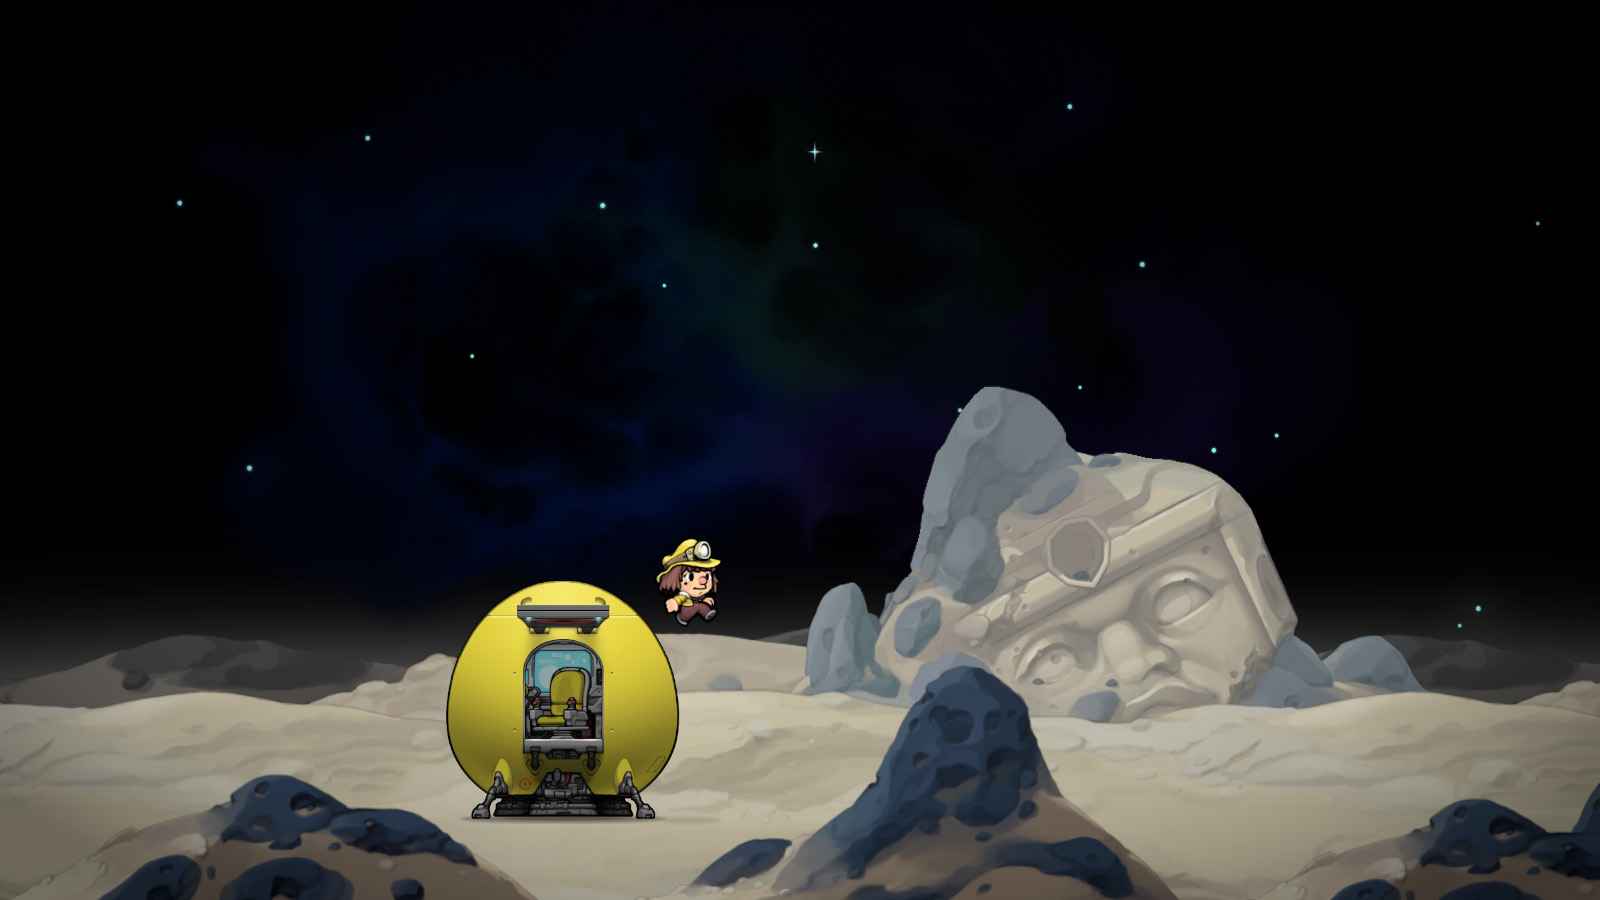 Spelunky Gameplay Trailer Gives Us Our First Look at the Long